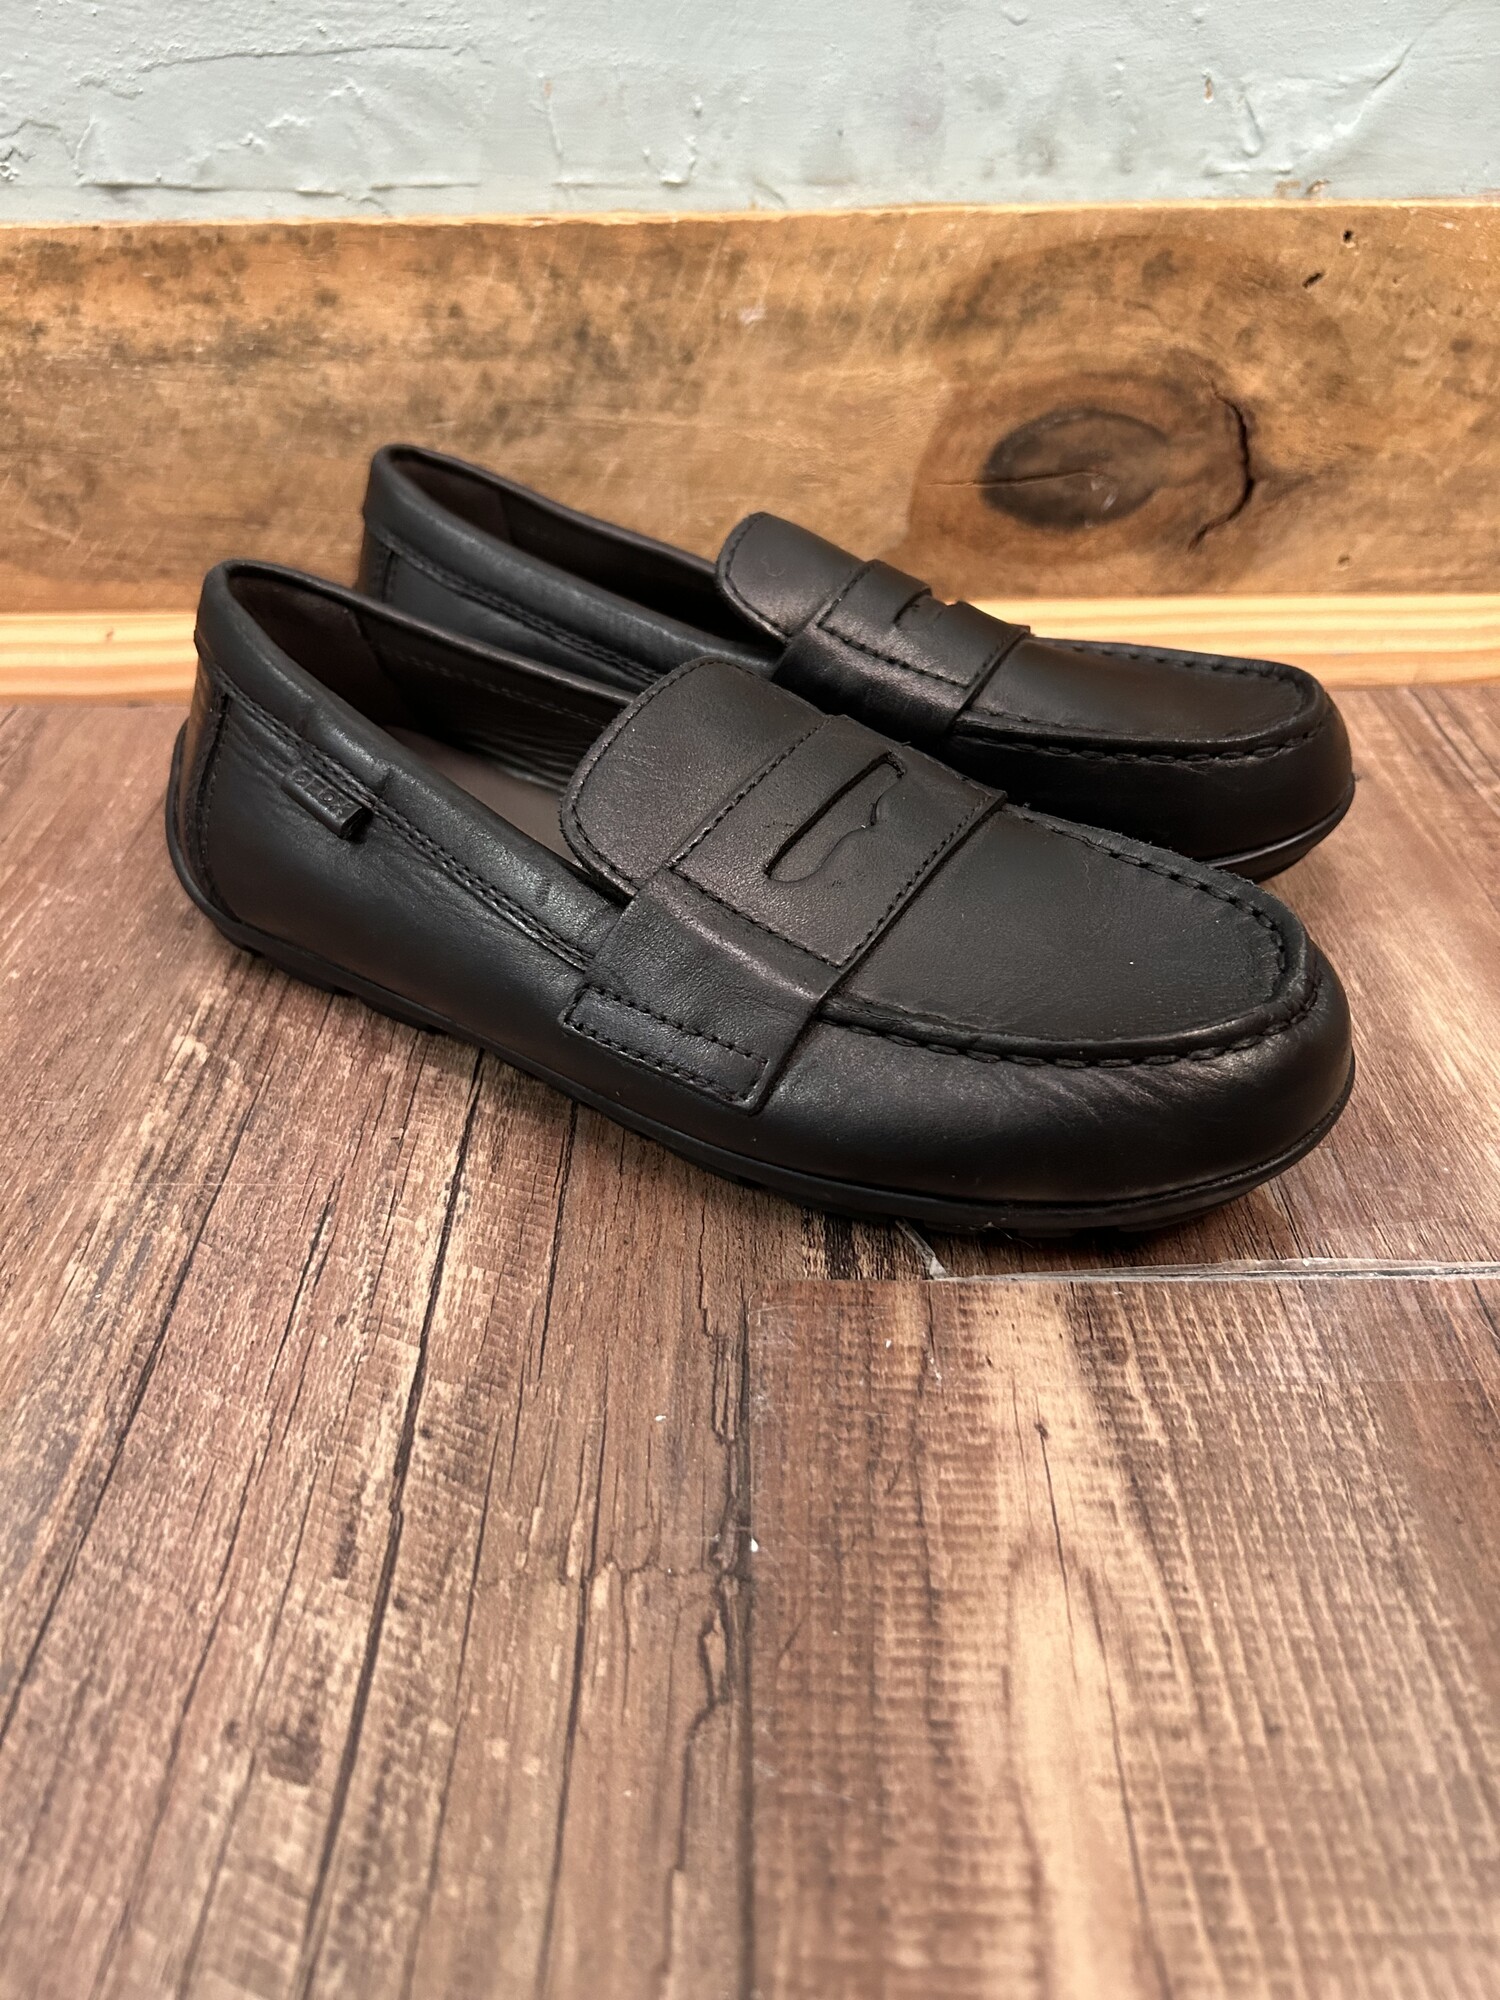 Geox Respira NEW Loafer, Black, Size: Shoes 2.5

*Retails for $80 new*